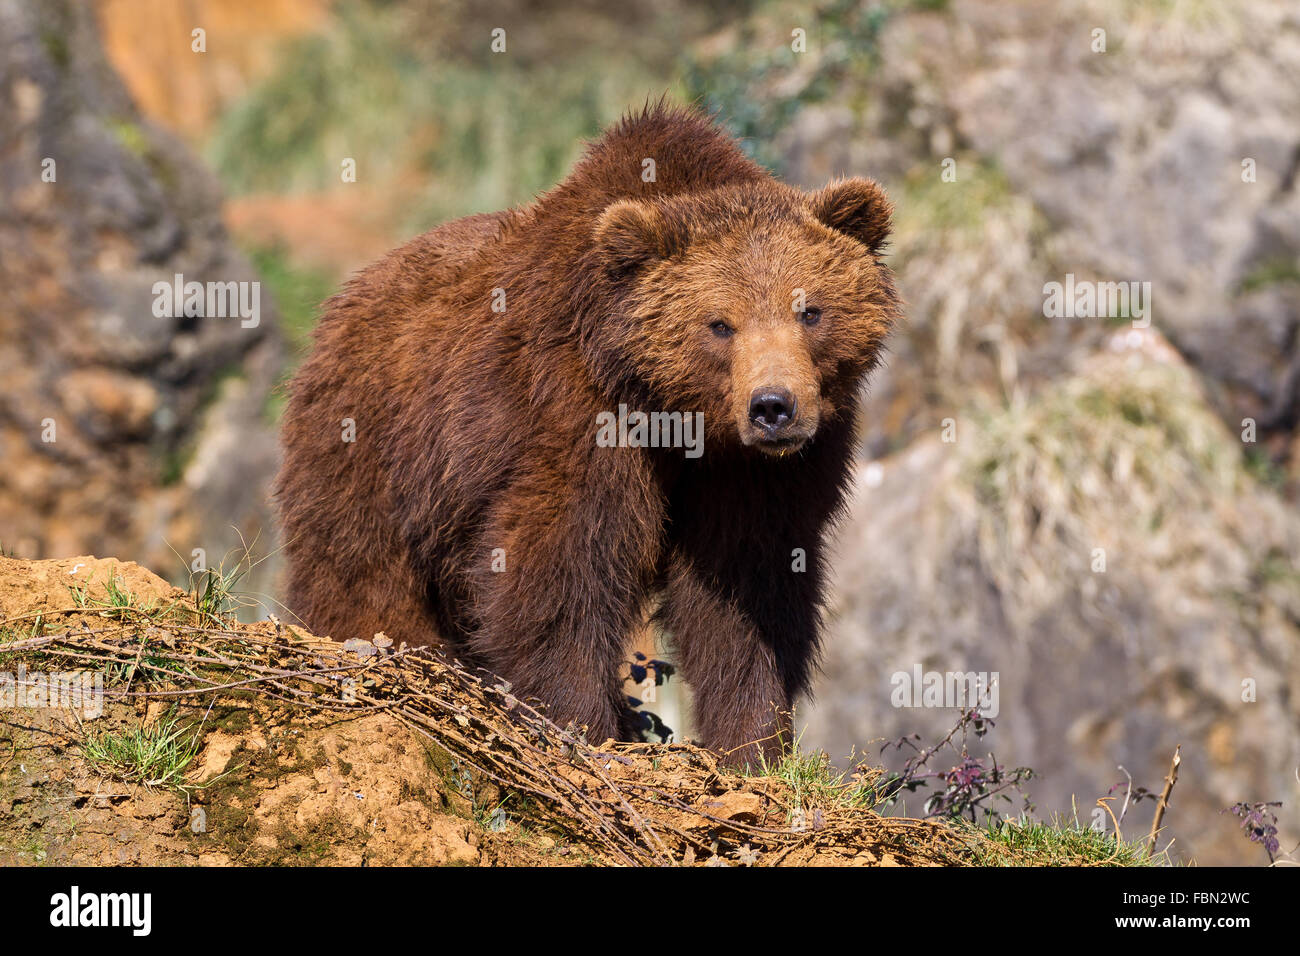 A brown (or grizzly) bear in Cabarceno Nature Park, Cantabria, Spain. Stock Photo